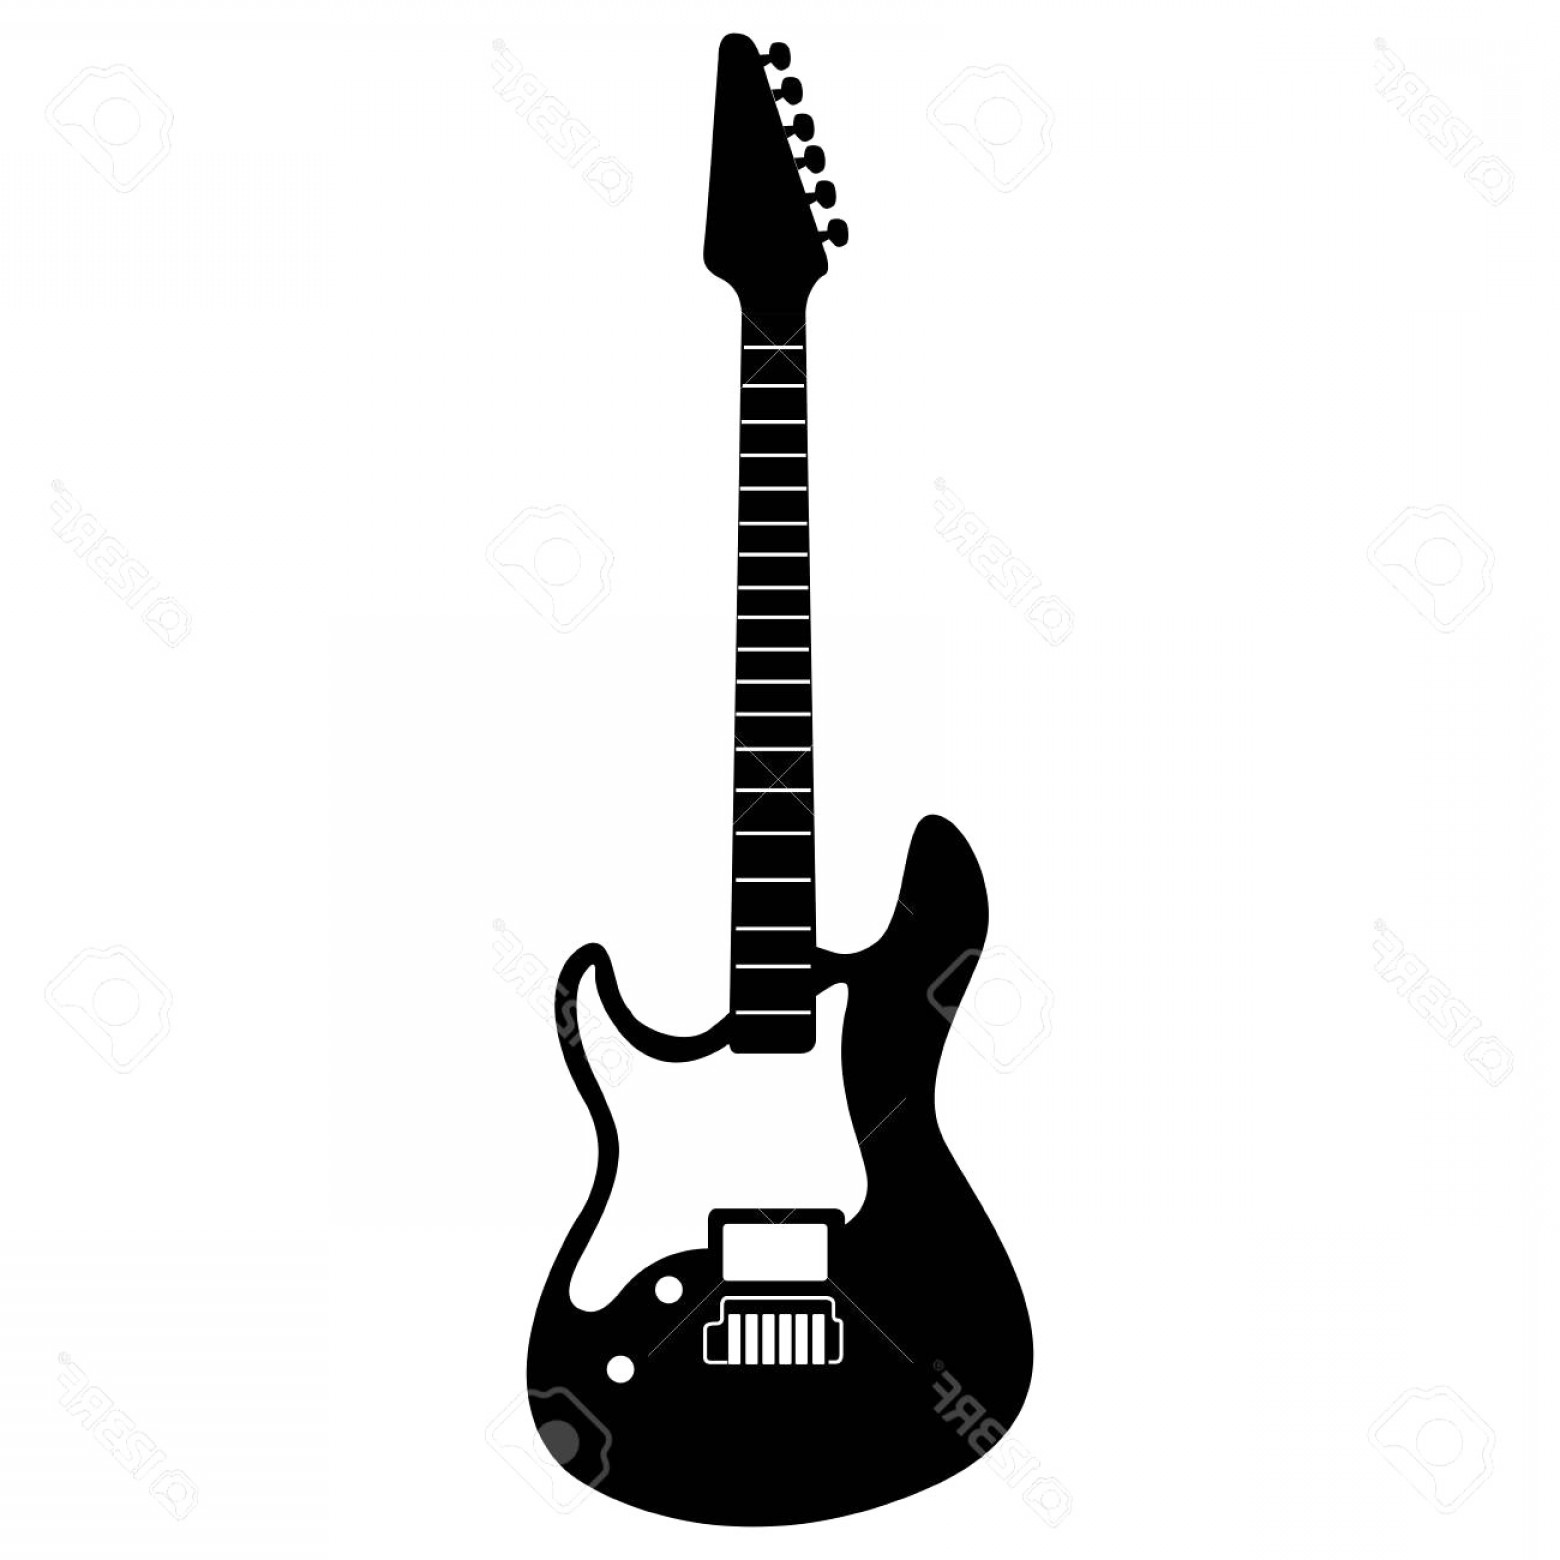 Download Guitar Outline Vector at Vectorified.com | Collection of ...